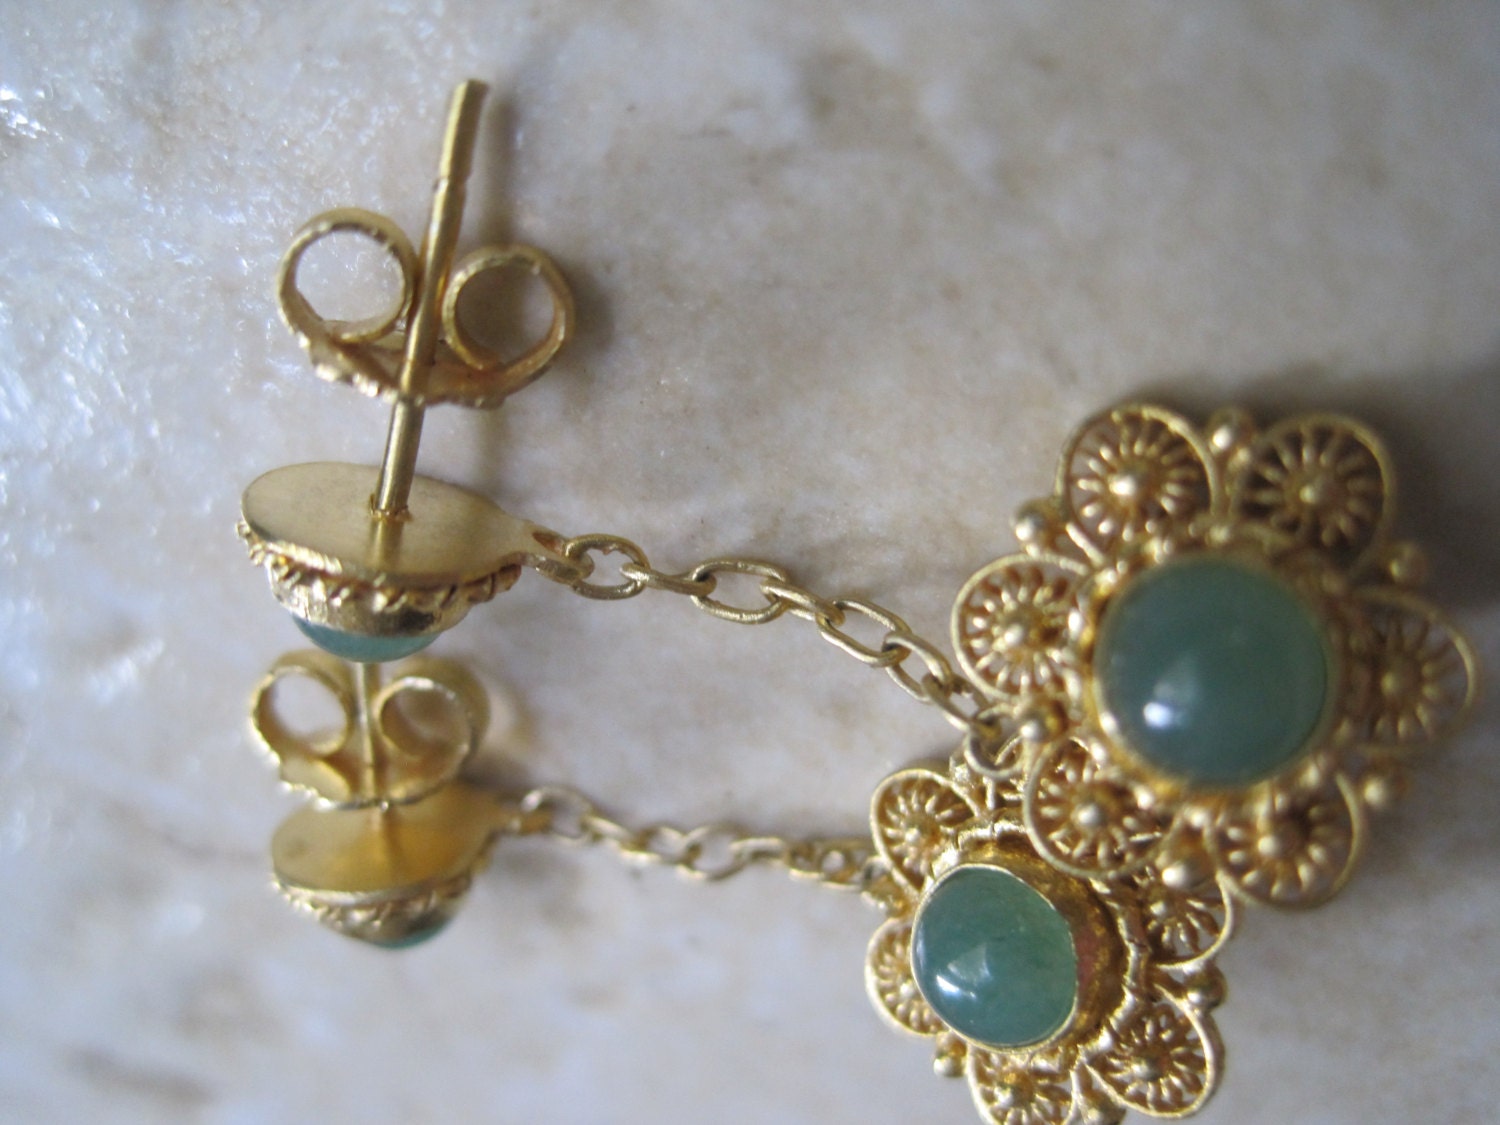 Vintage Chinese Earrings Gilt Silver and Jade Post by Anteeka